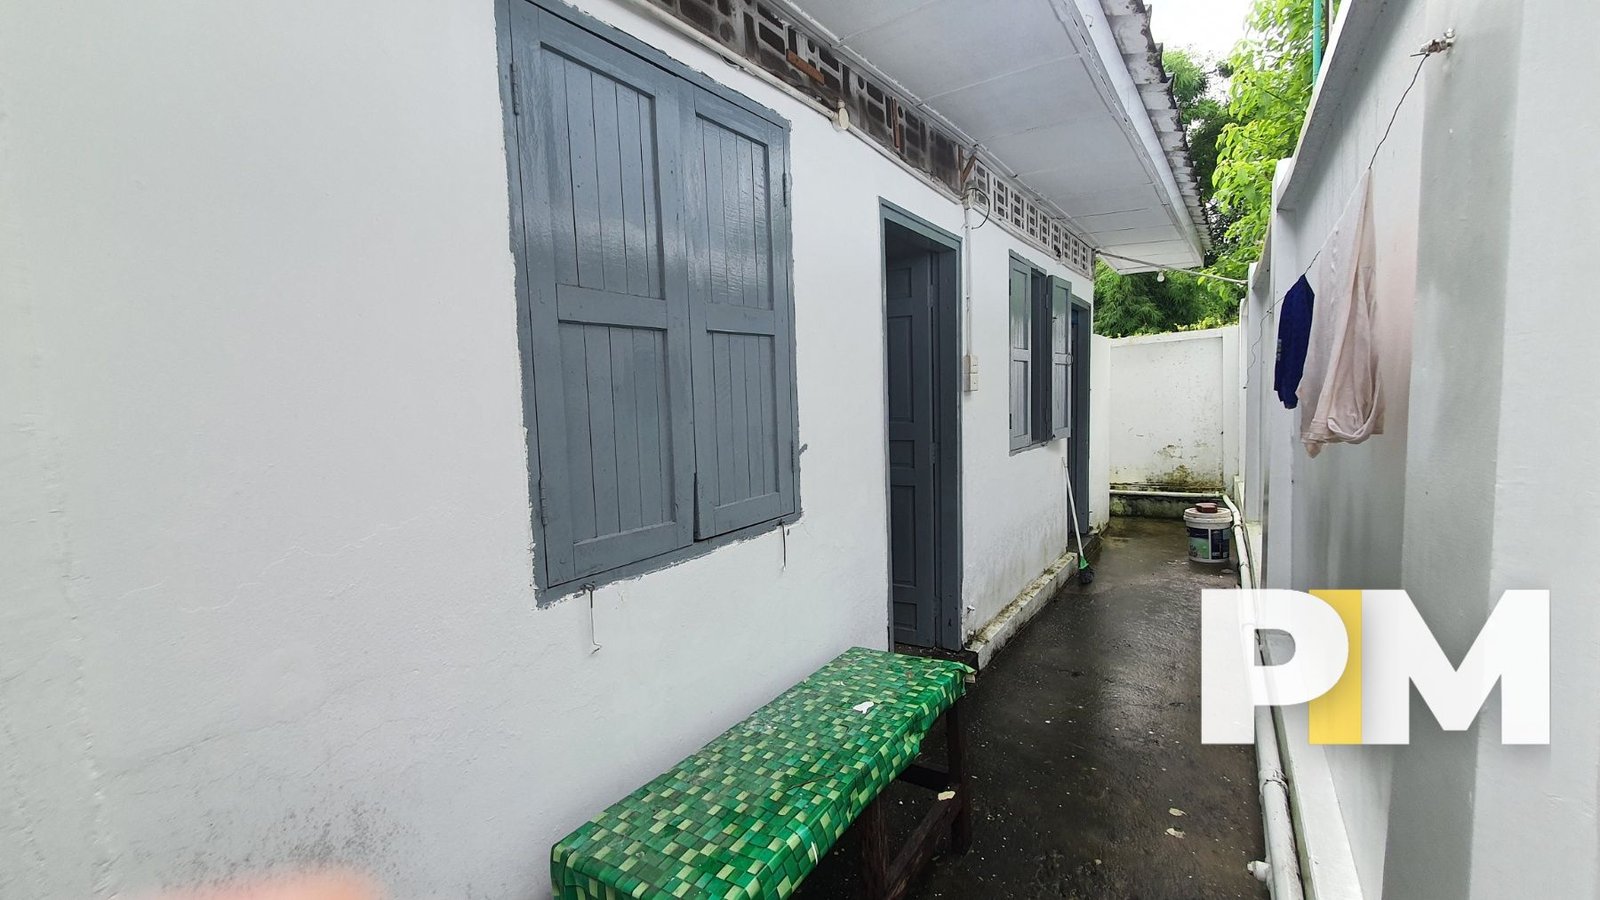 Back of house - Property in Yangon